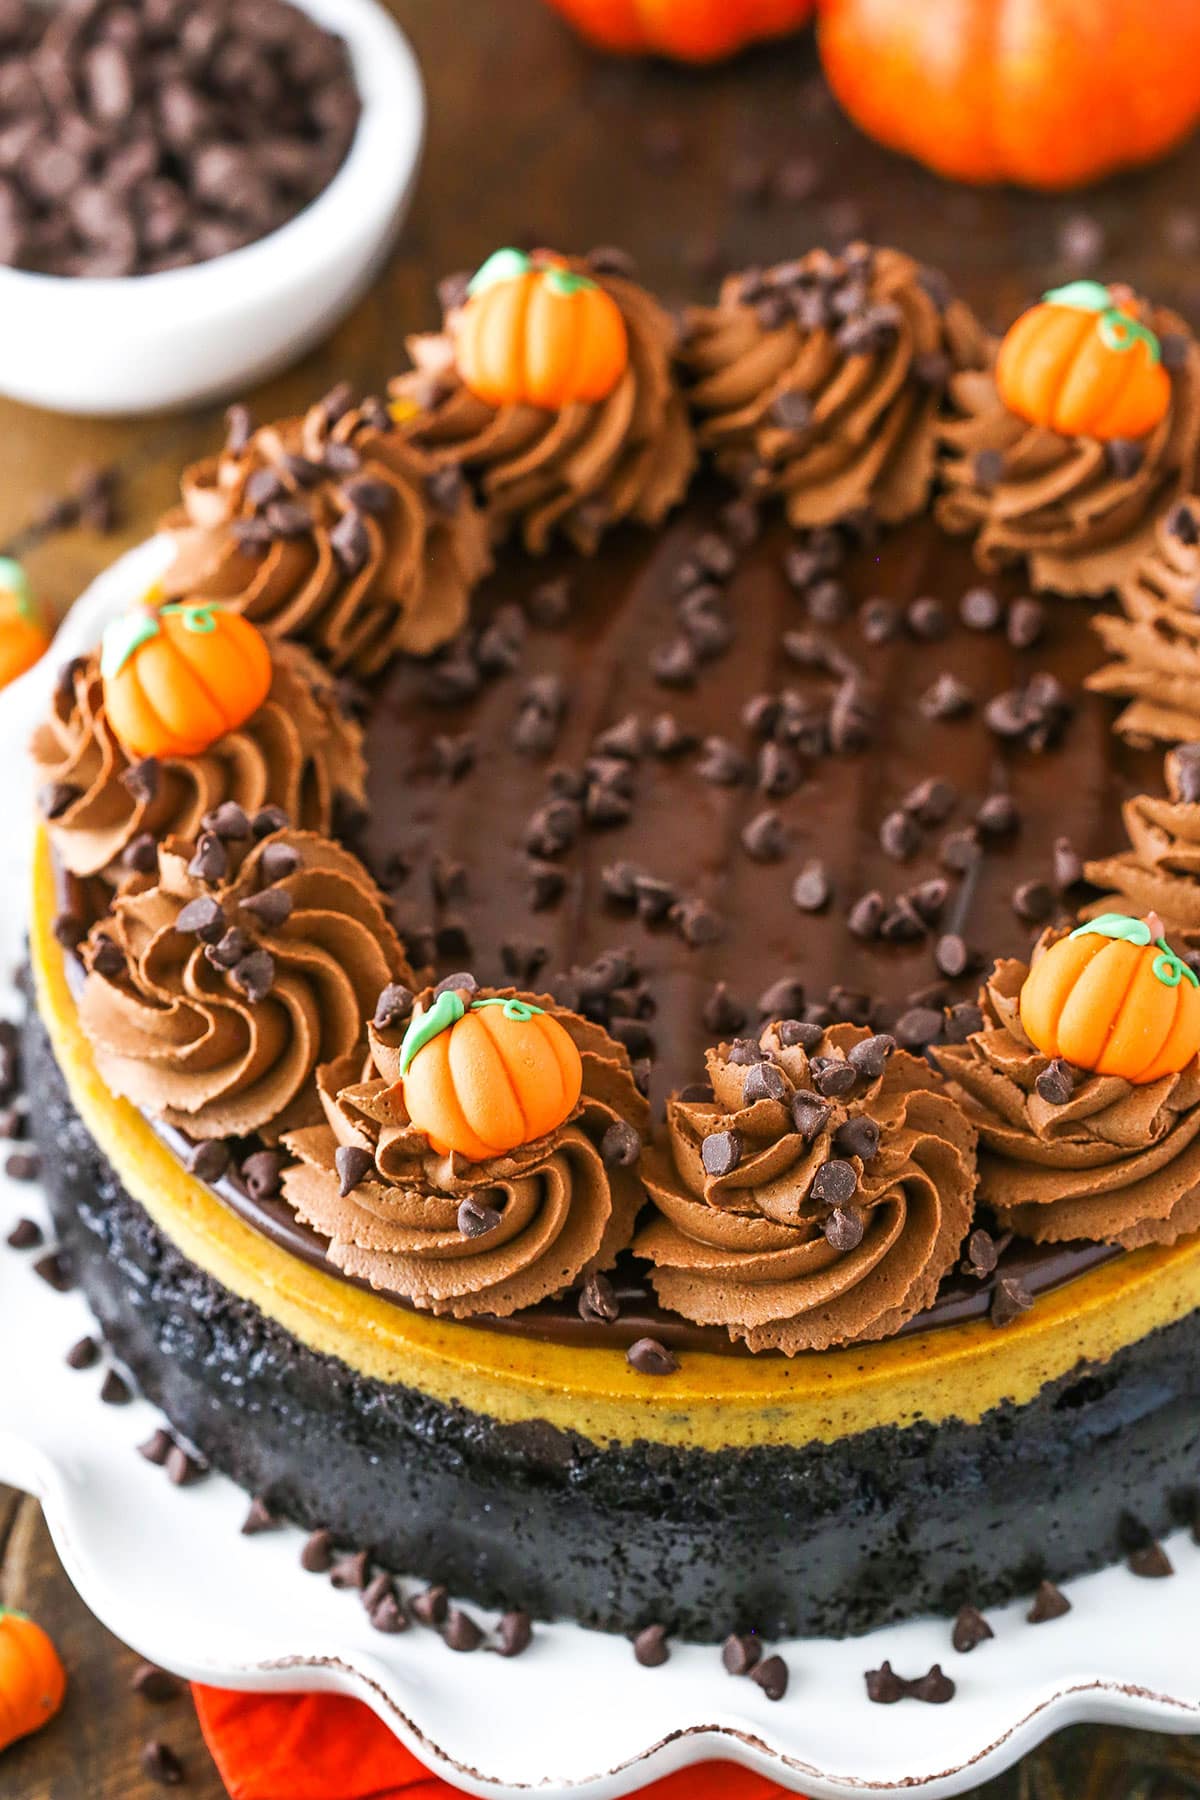 Overhead view of a full Chocolate Chip Pumpkin Cheesecake topped with chocolate swirls and candy pumpkins on a white serving platter